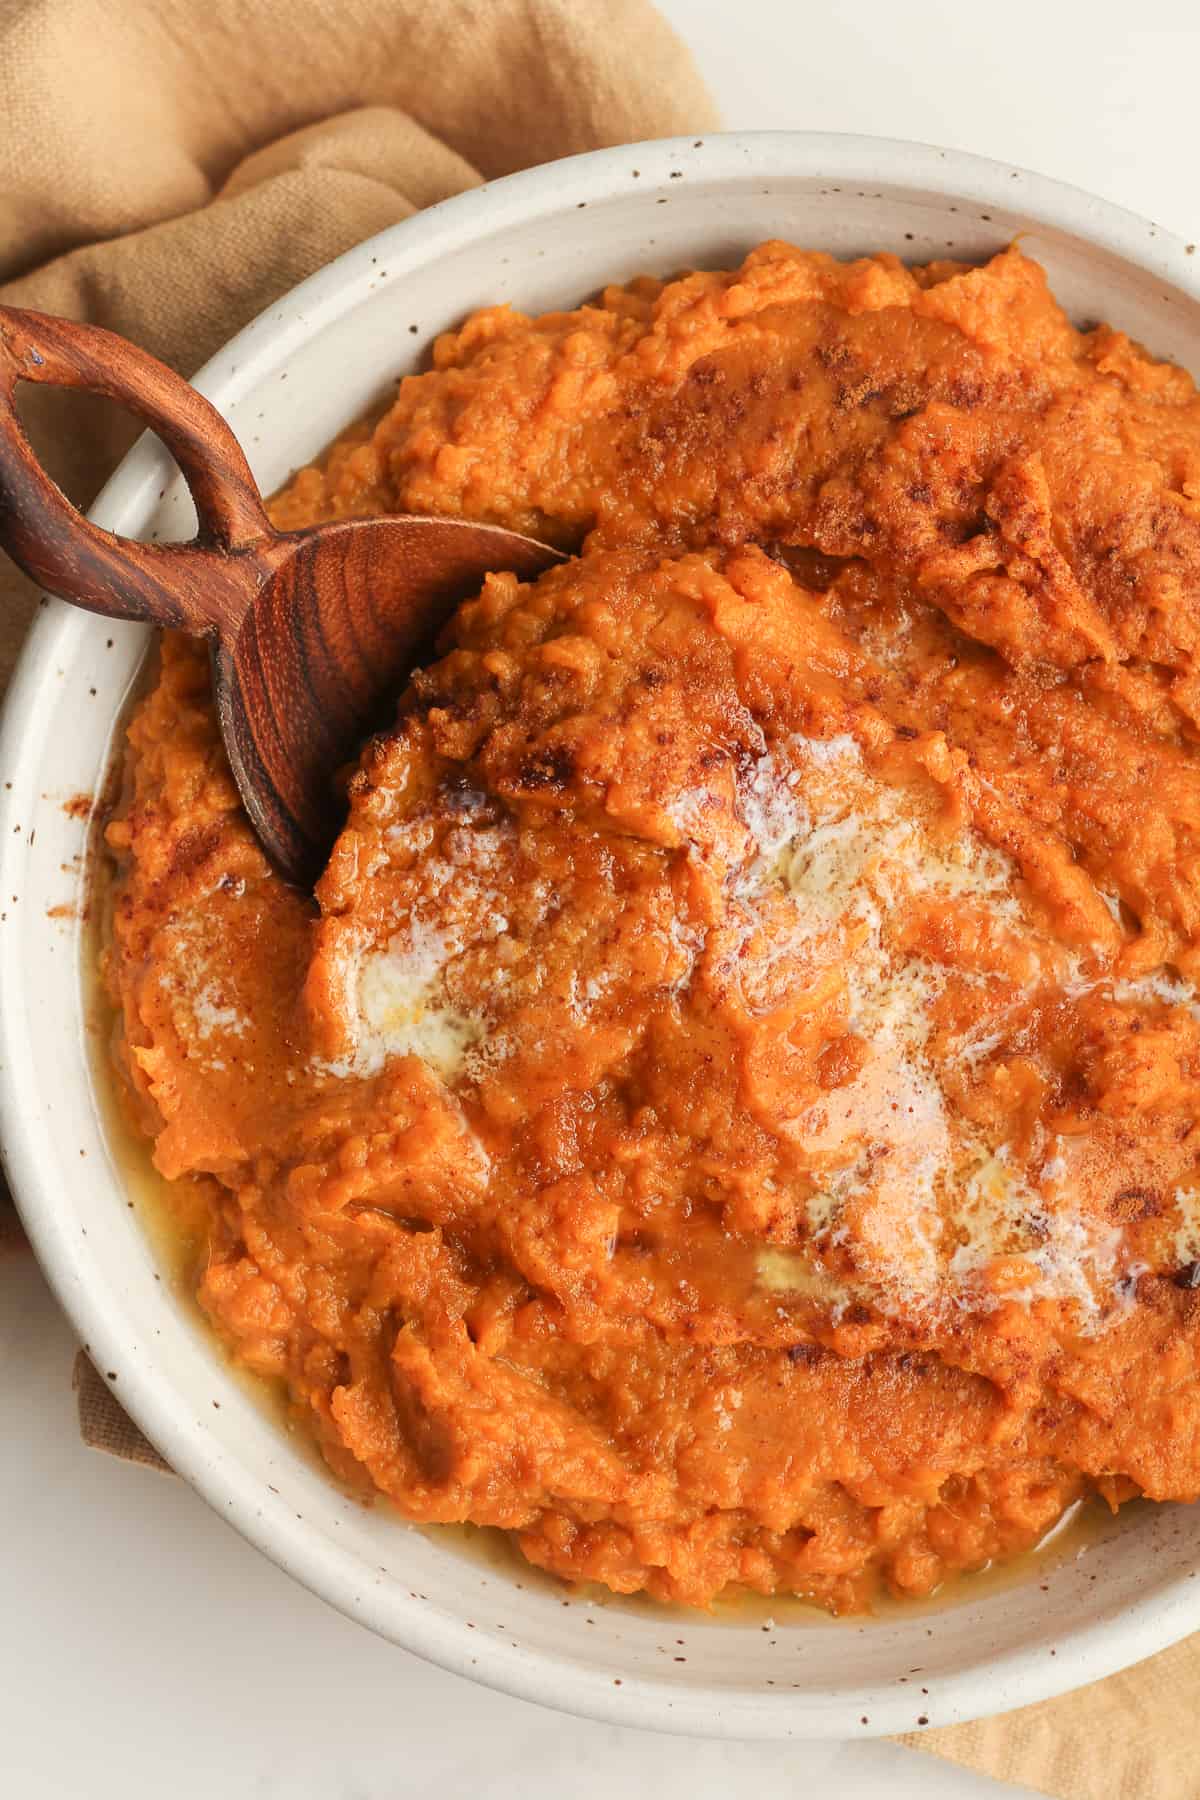 Closeup shot of a bowl of mashed sweet potatoes with a wooden spoon.